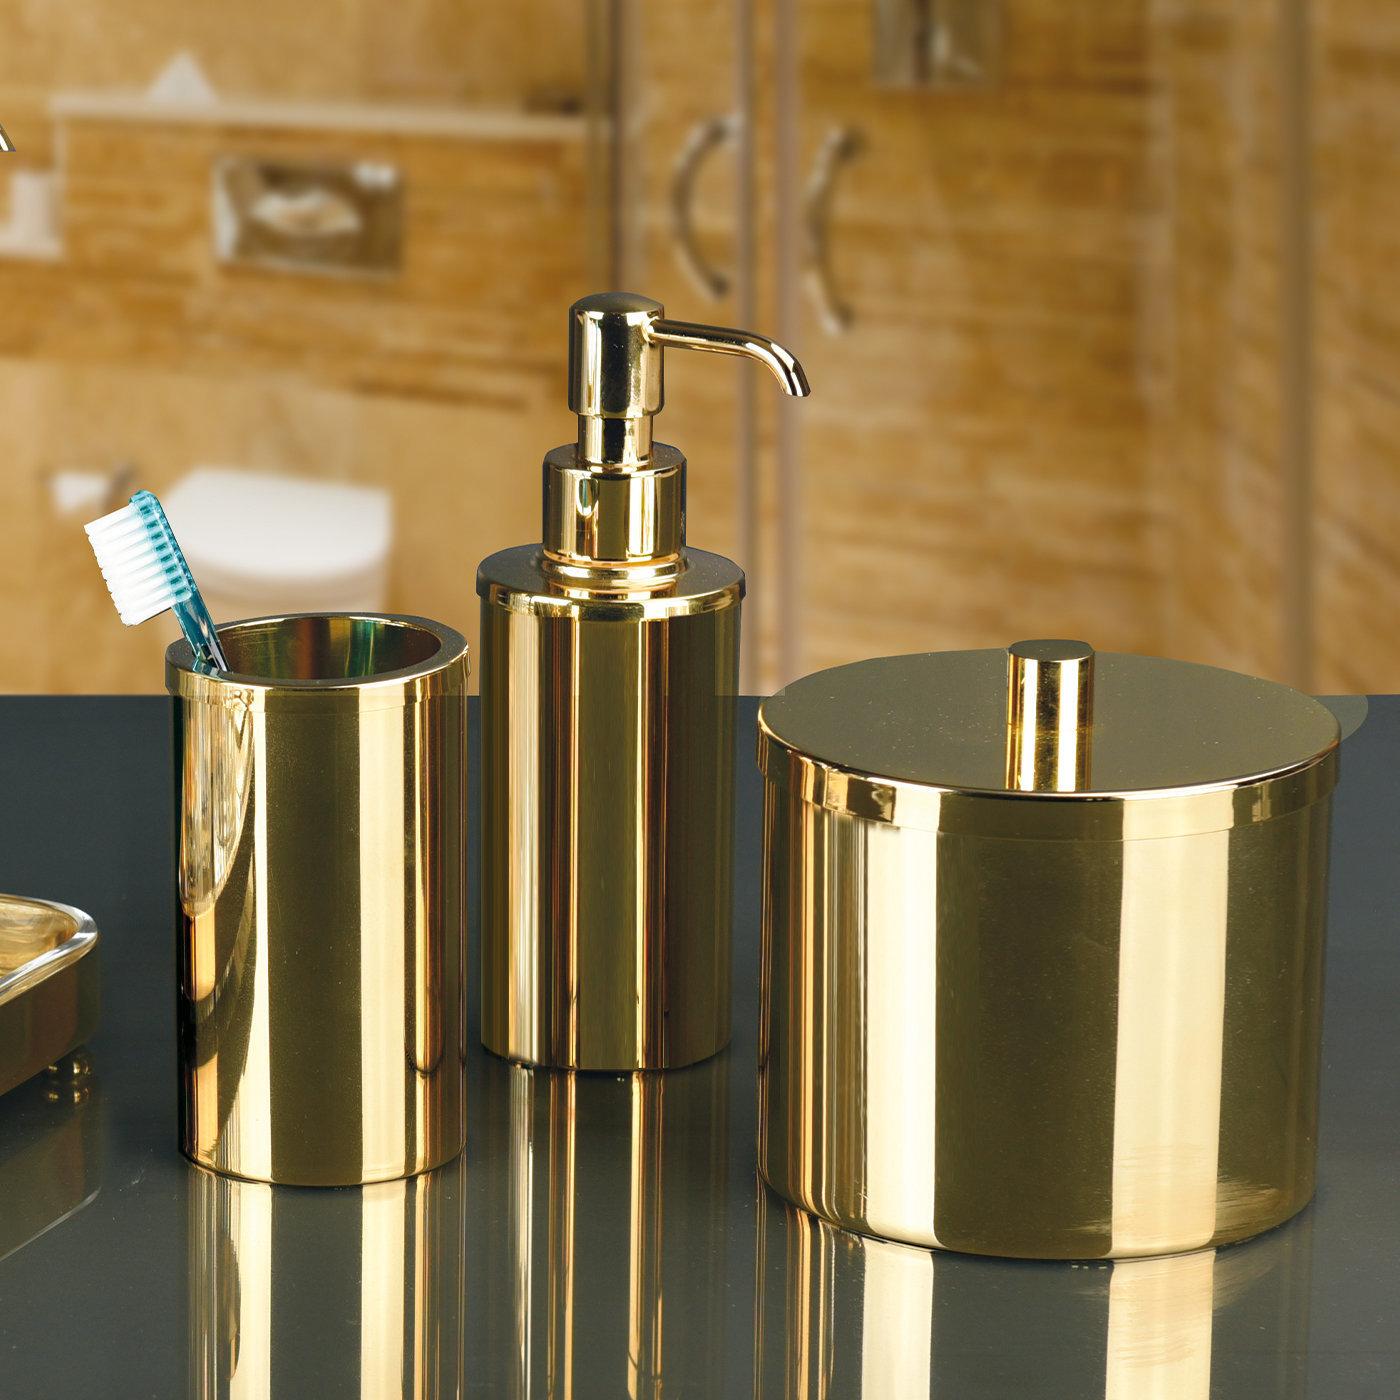 This bathroom set is comprised of a toothbrush holder, a soap dispenser, and a cotton box entirely handcrafted of brass, finished with precious 24k gold. An opulent accent to any modern or classic bathroom, it combines traditional craftsmanship with